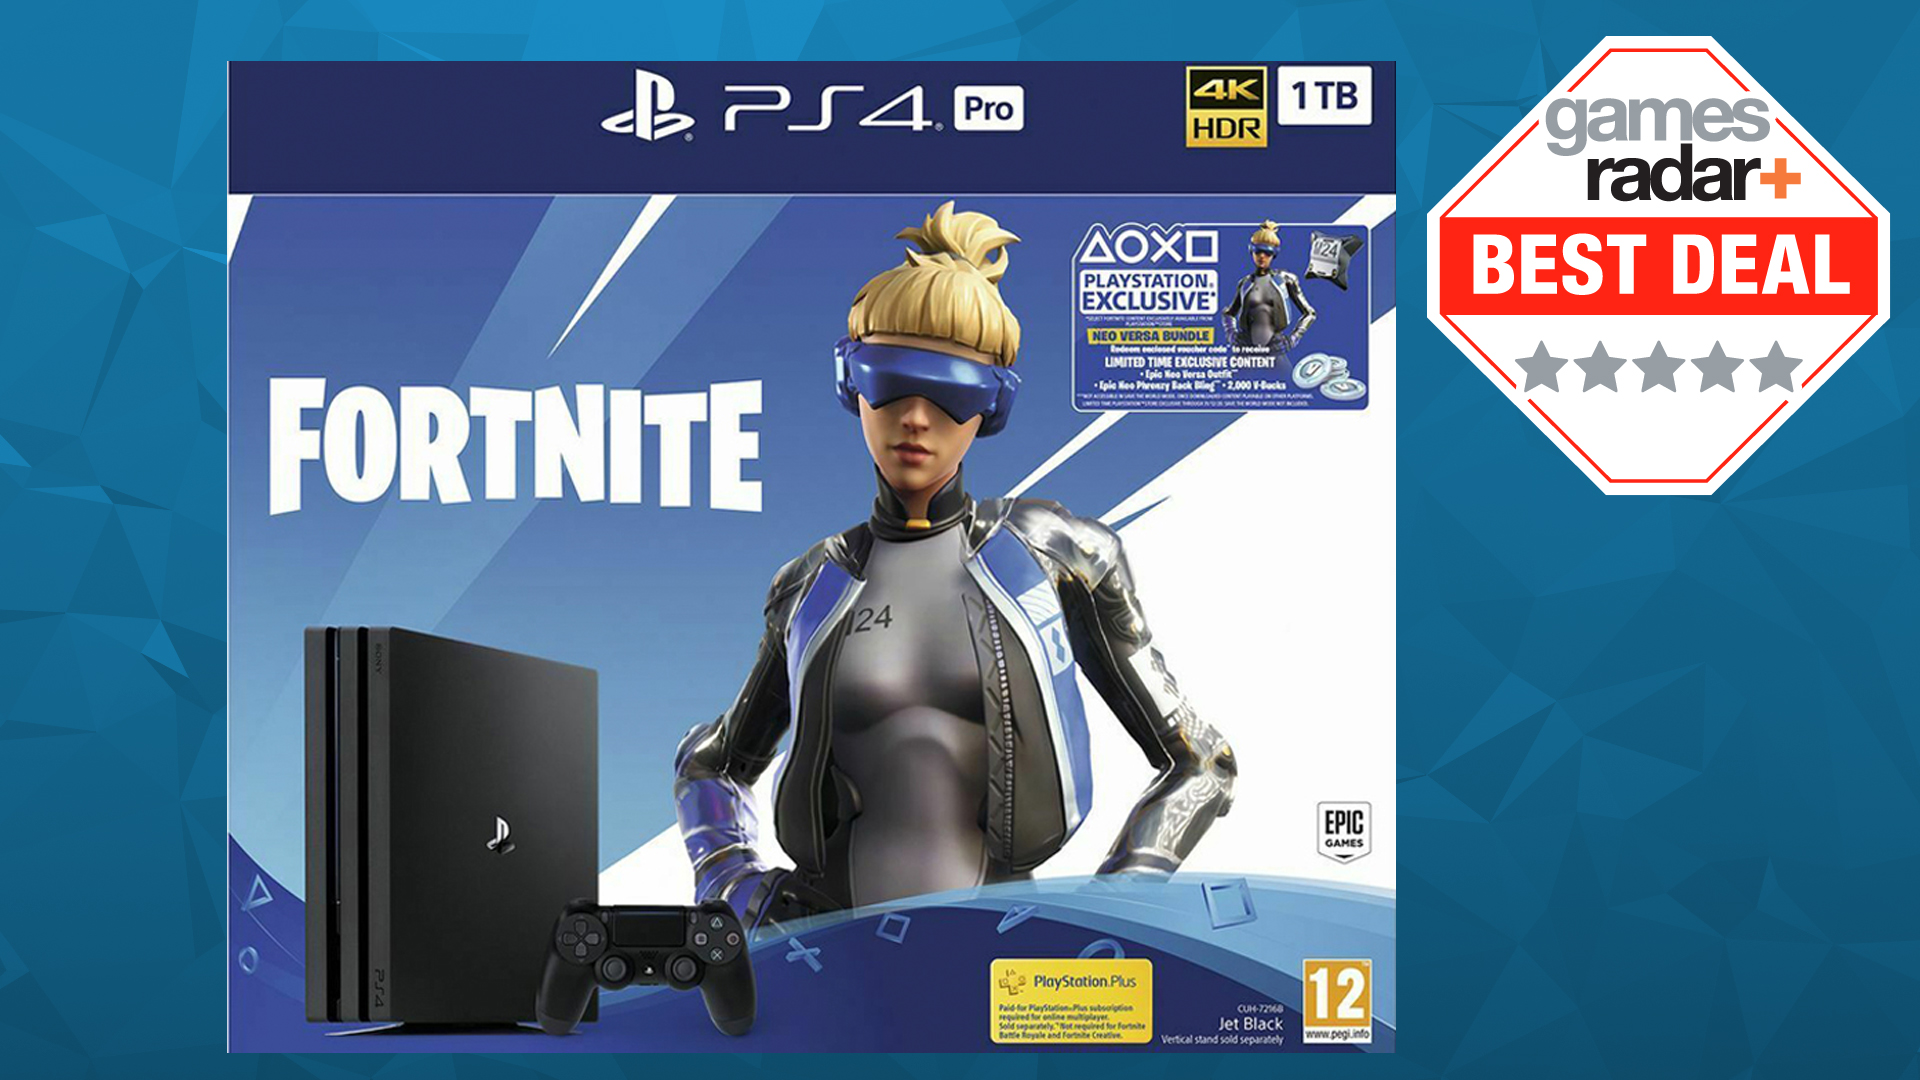 Muskuløs Næb kompas Amazing PS4 Pro bundle: for £299 you get console, Fortnite Neo Versa,  Spider-Man, 12 months PS Plus, and more! | GamesRadar+